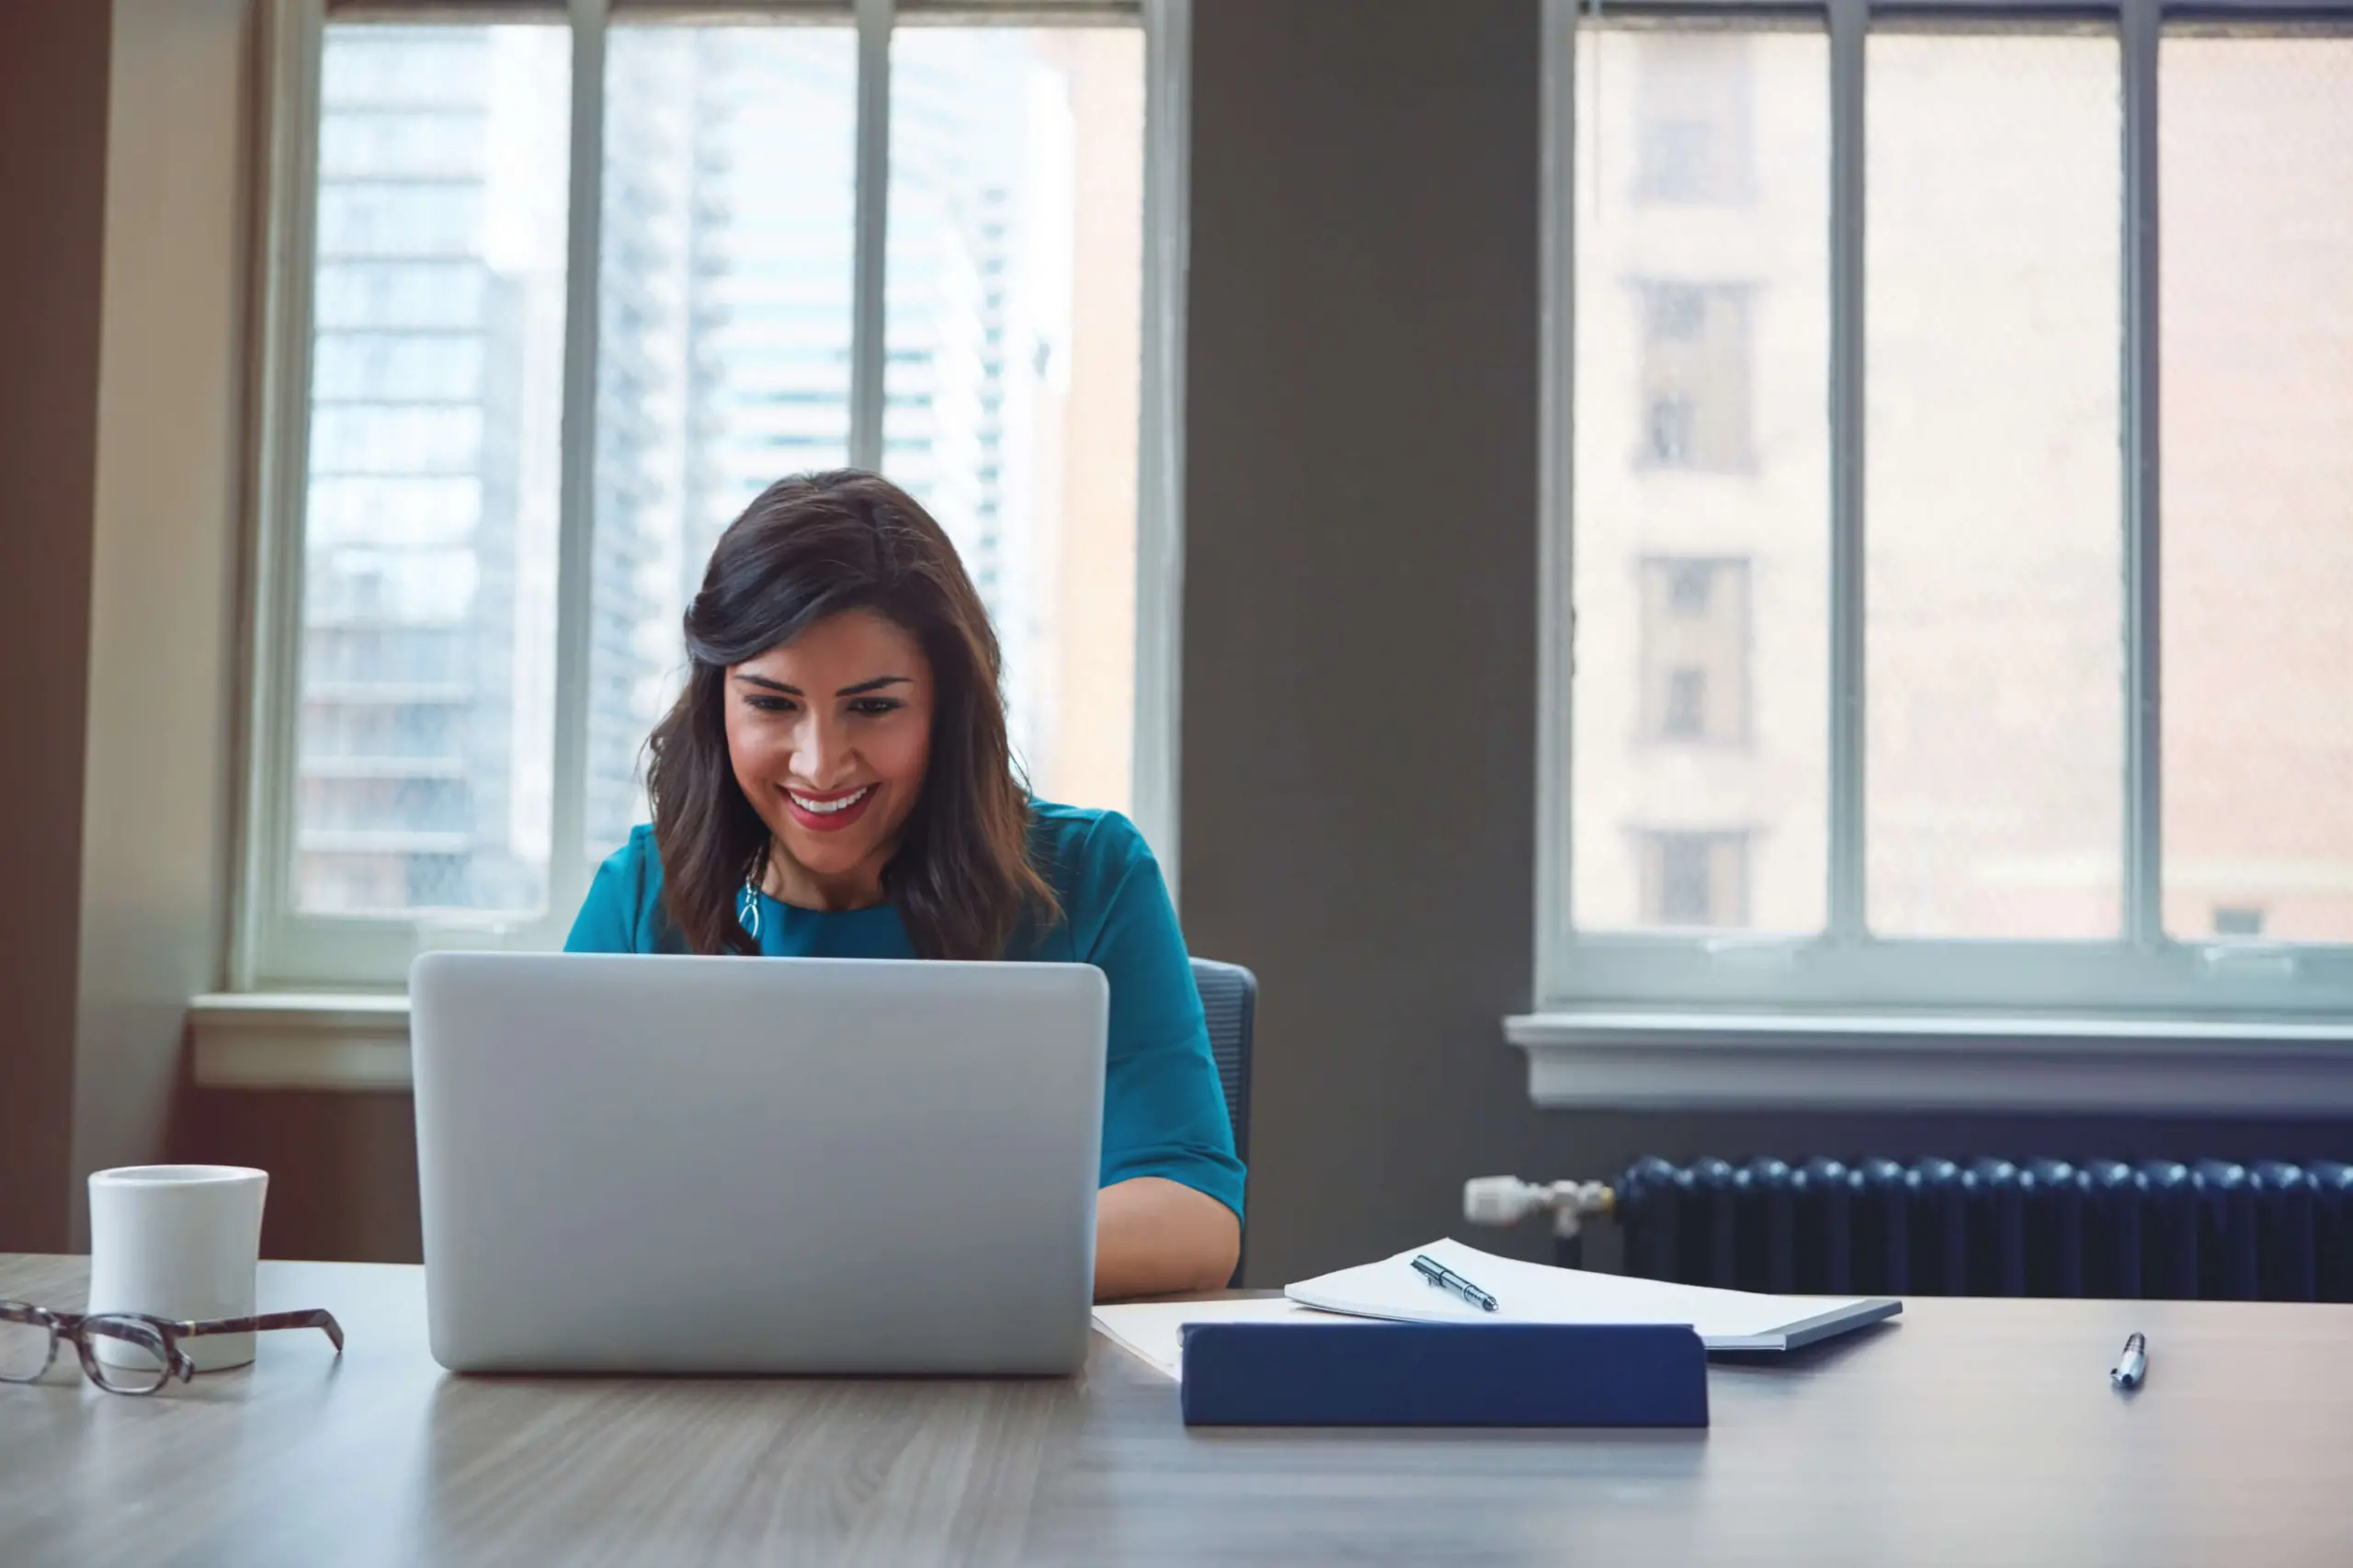 businesswoman works on laptop at conference room table